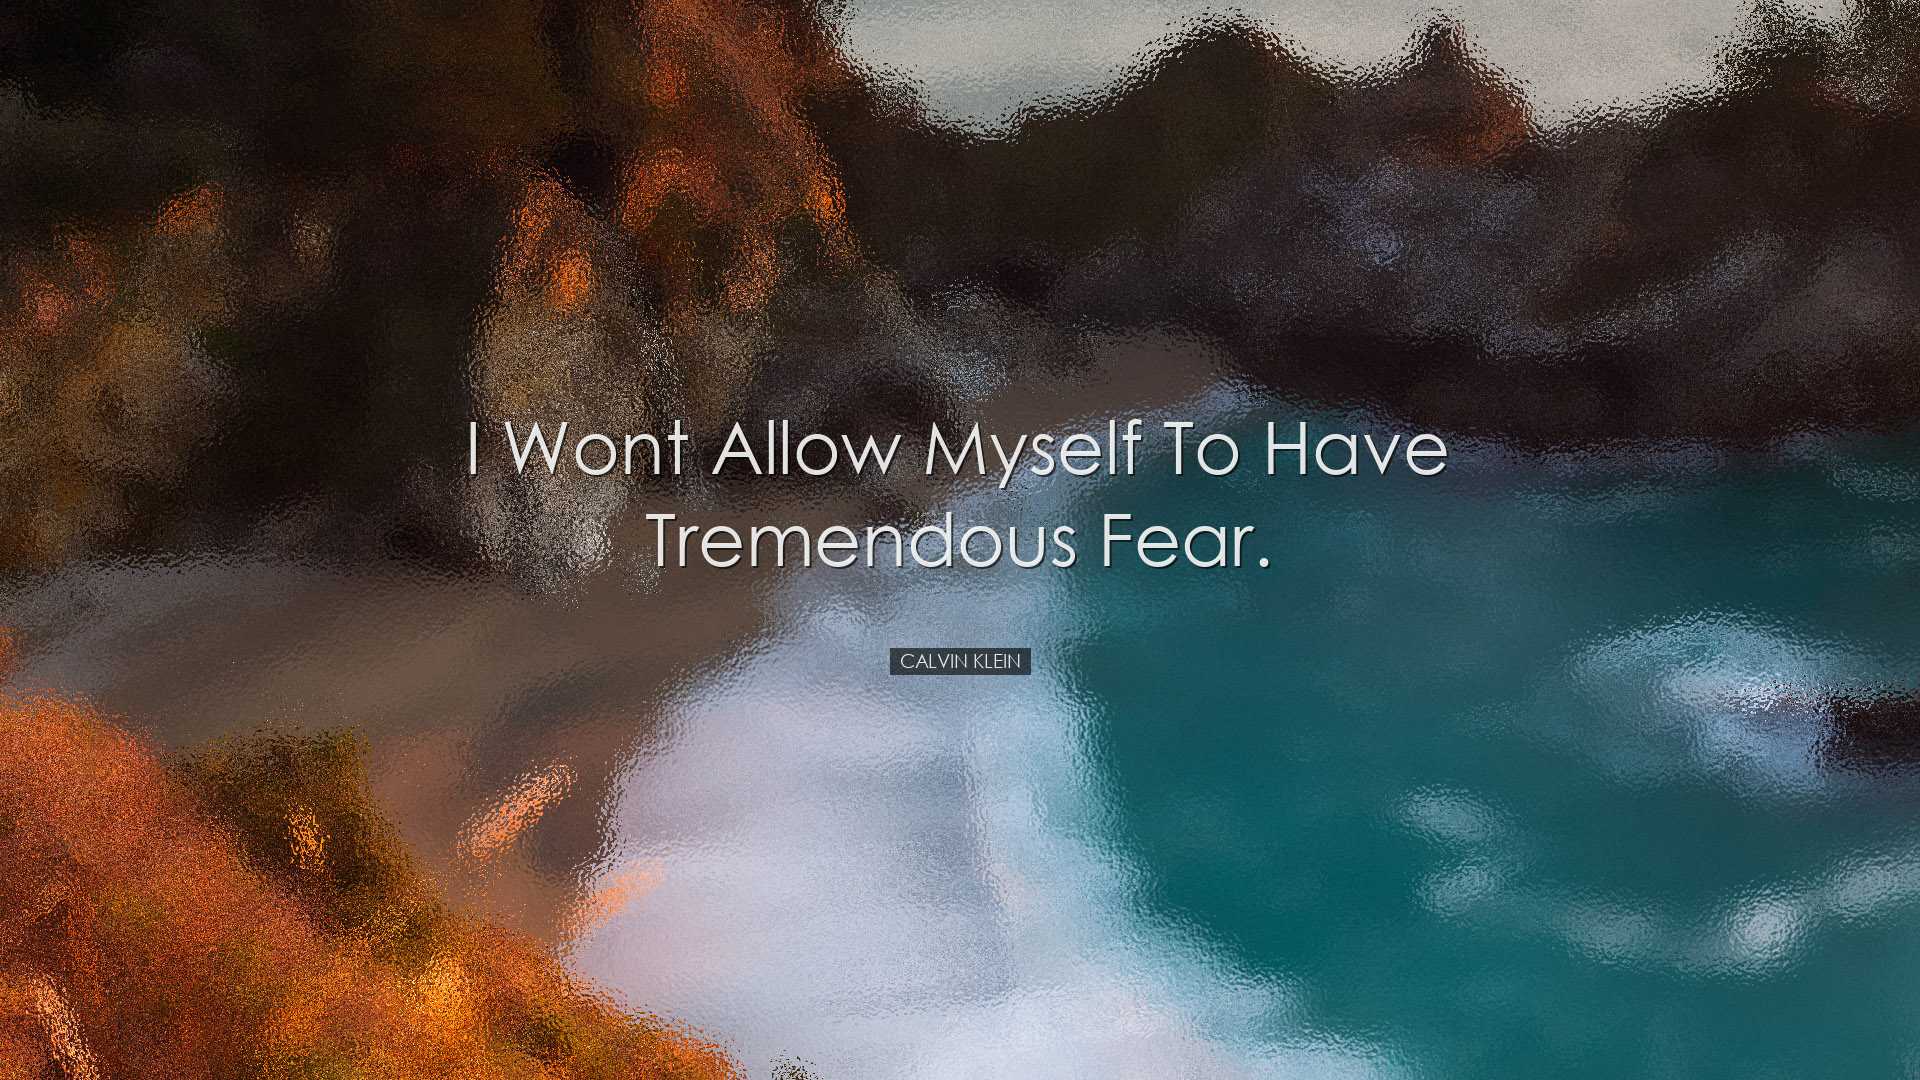 I wont allow myself to have tremendous fear. - Calvin Klein